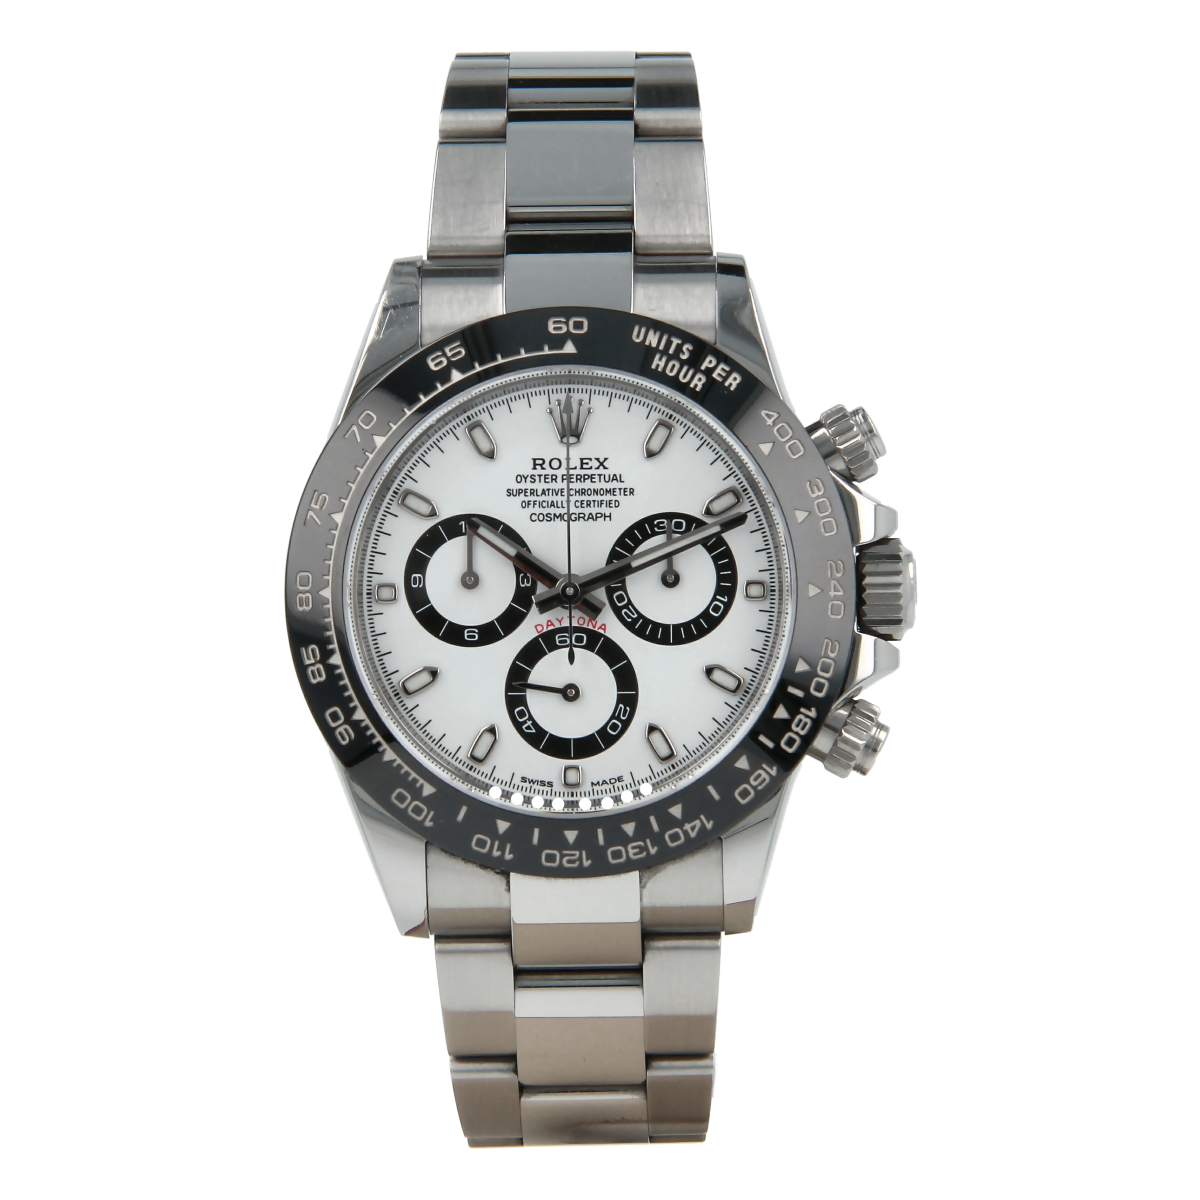 Rolex Cosmograph Daytona 116500LN White Dial *Full Set* | Buy pre-owned Rolex watch